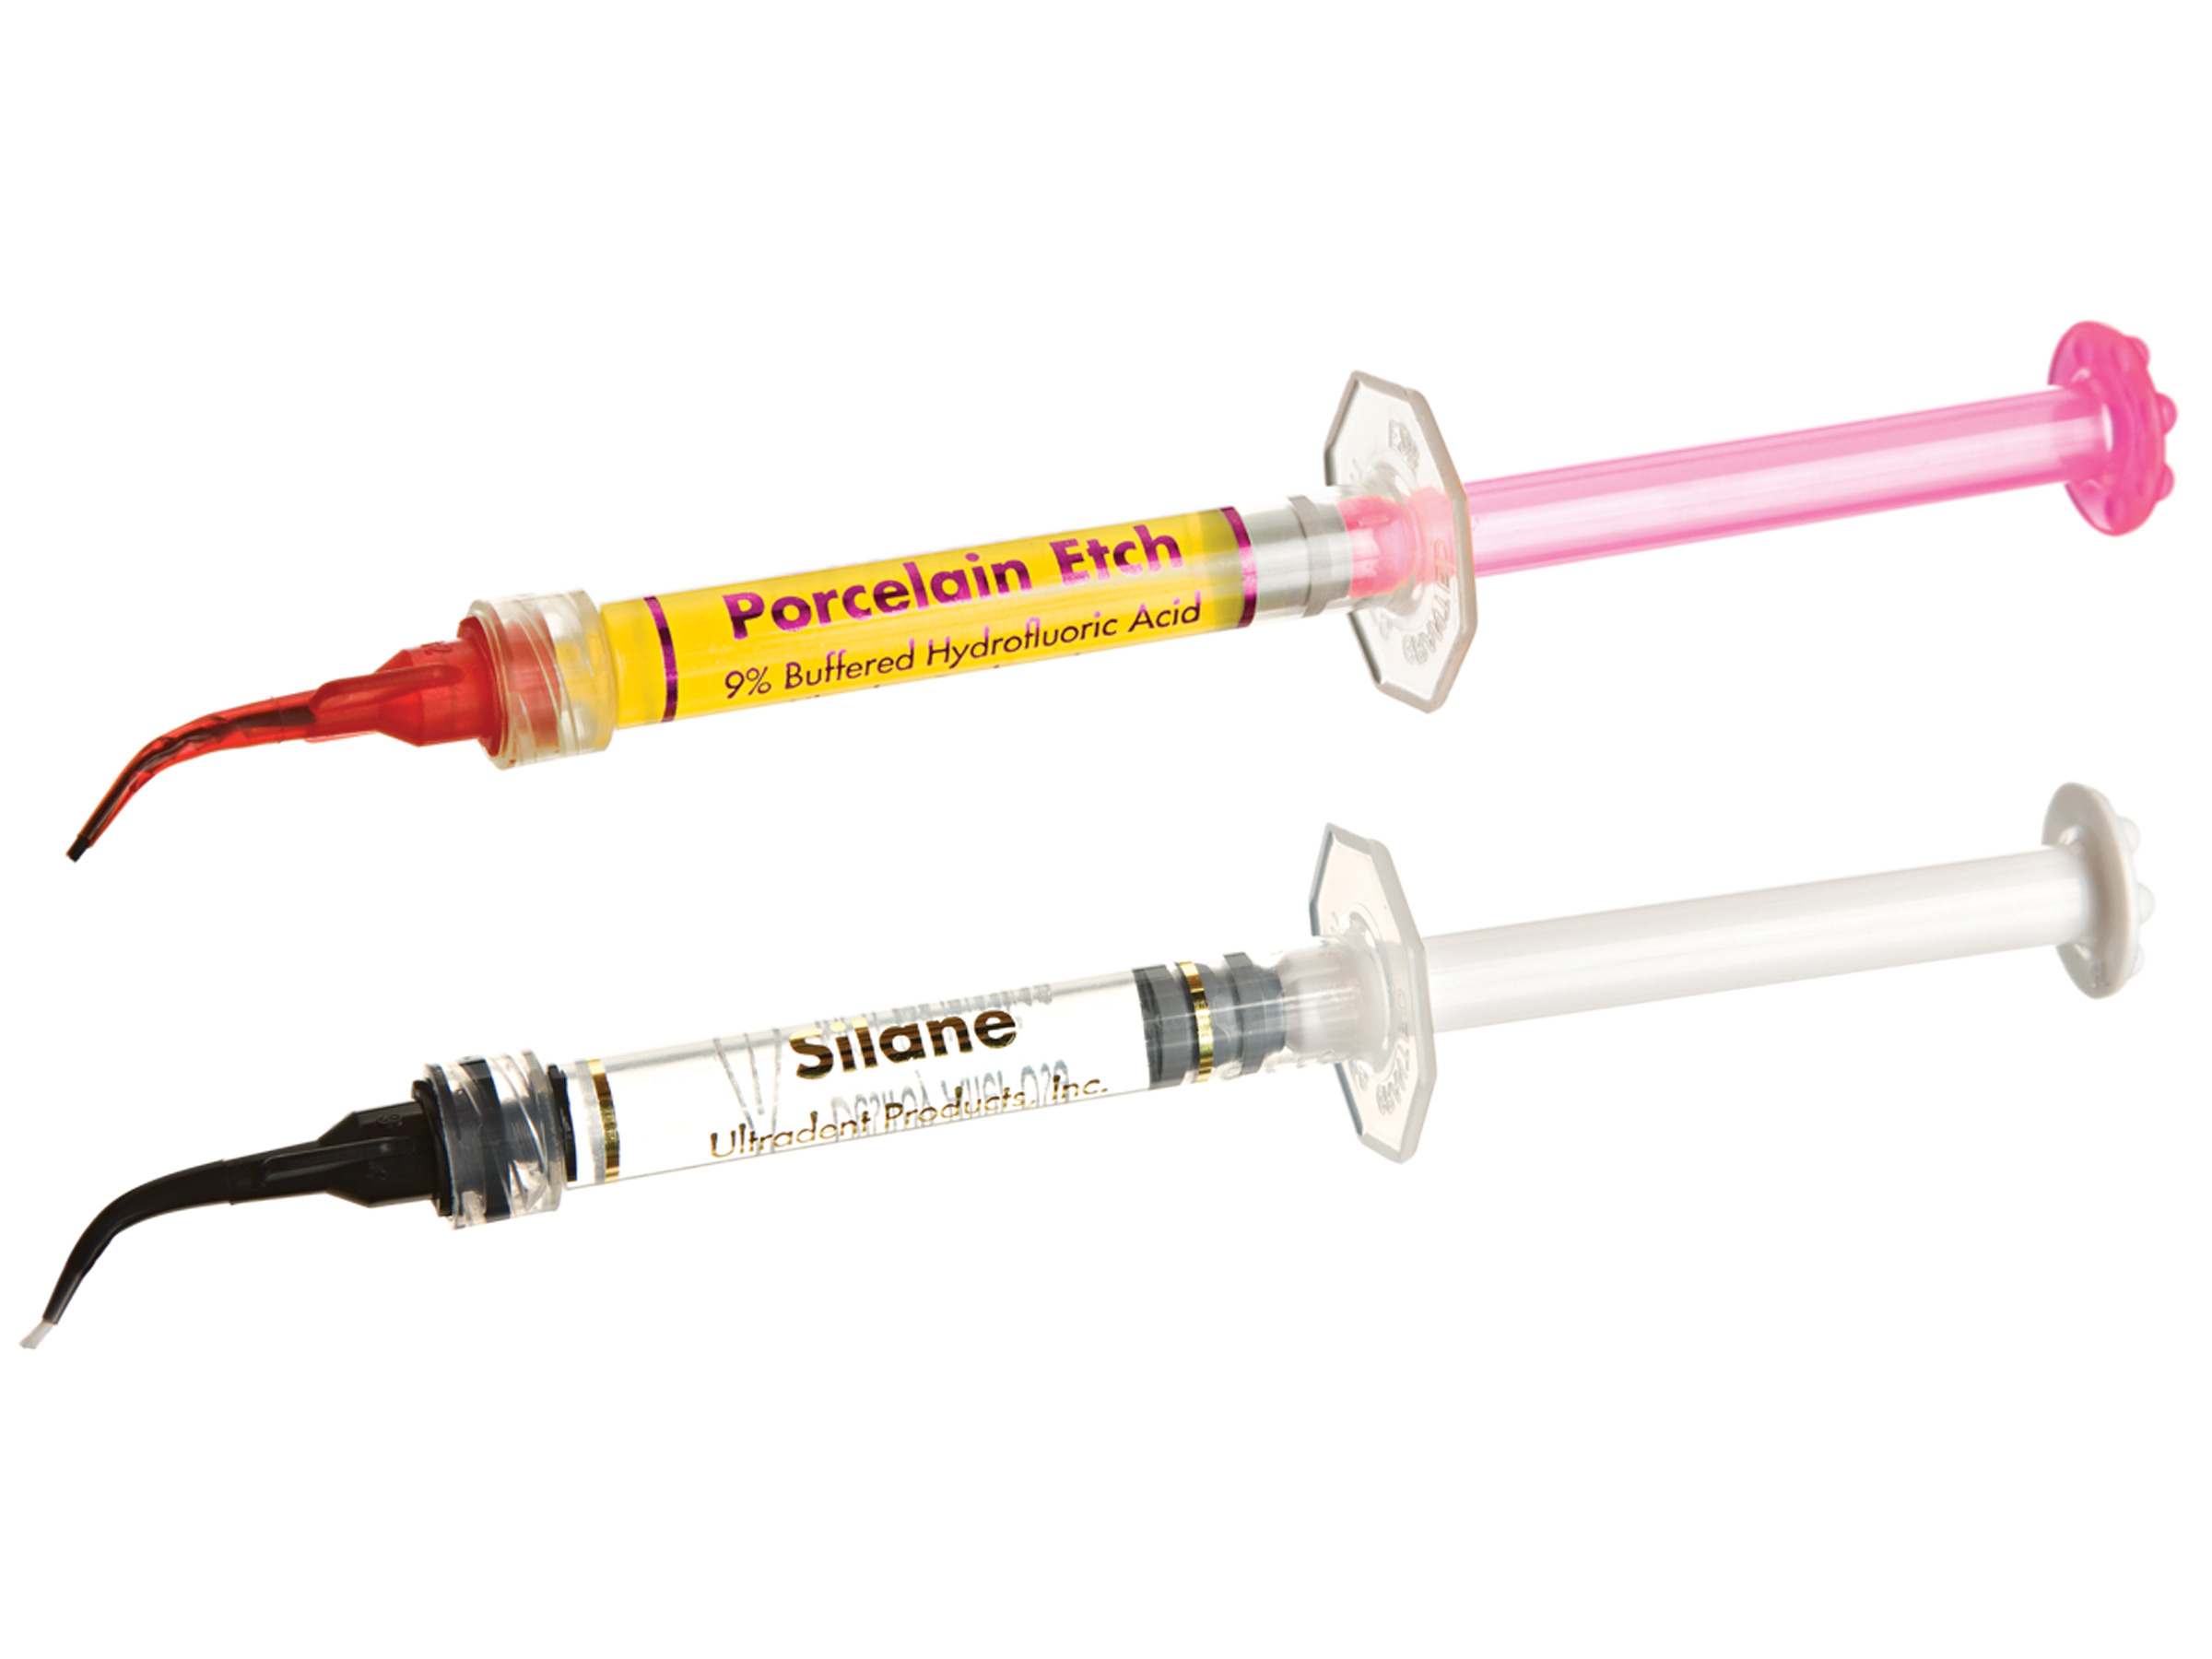 Porcelain Etch and Silane Syringes with Tips